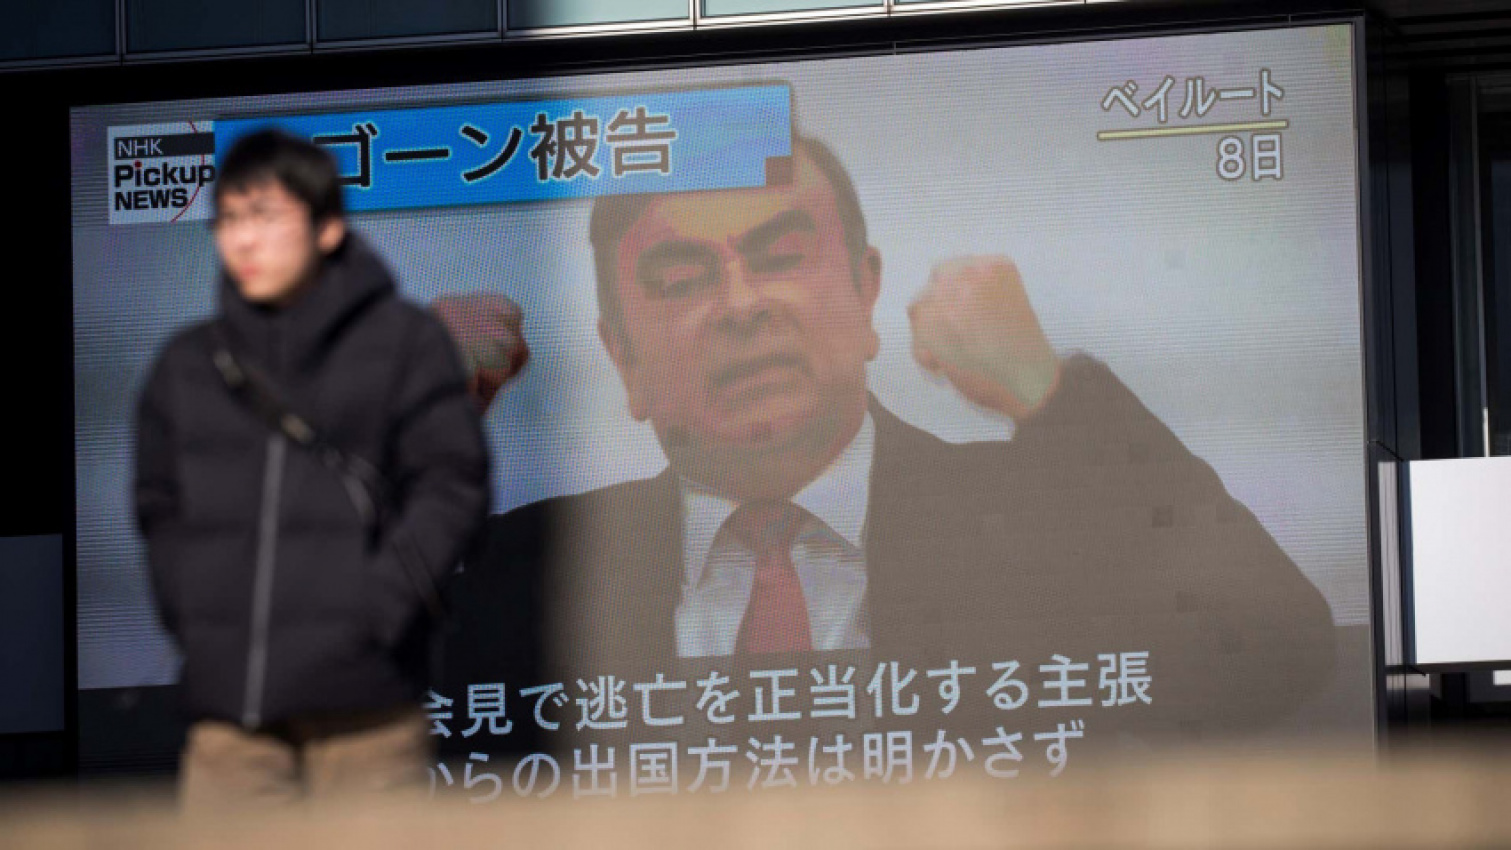 autos, cars, nissan, renault, carlos ghosn claims he never wanted a nissan-renault merger in the first place